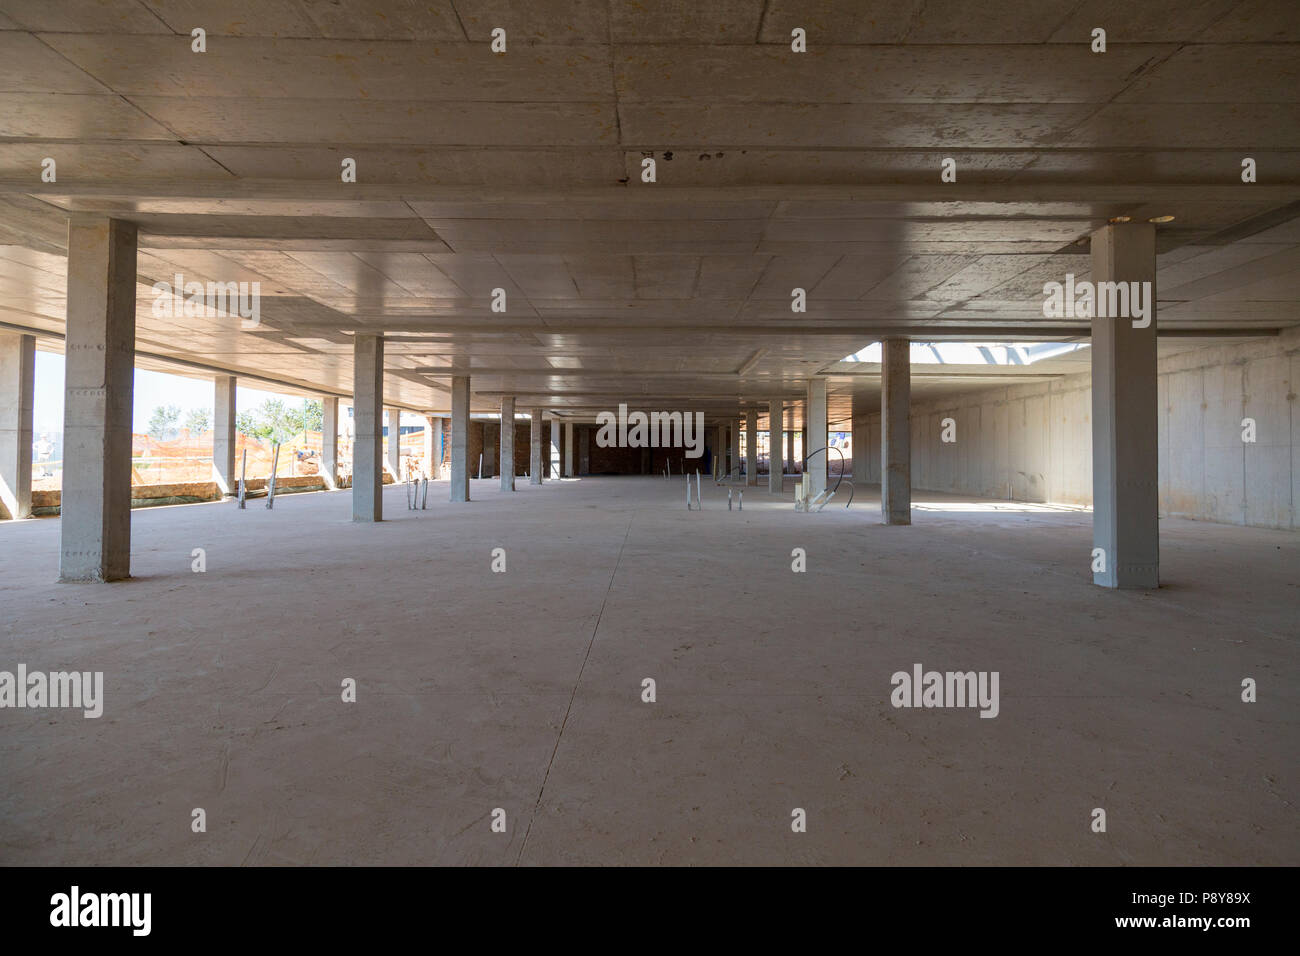 Empty basement area in a building under construction Stock Photo